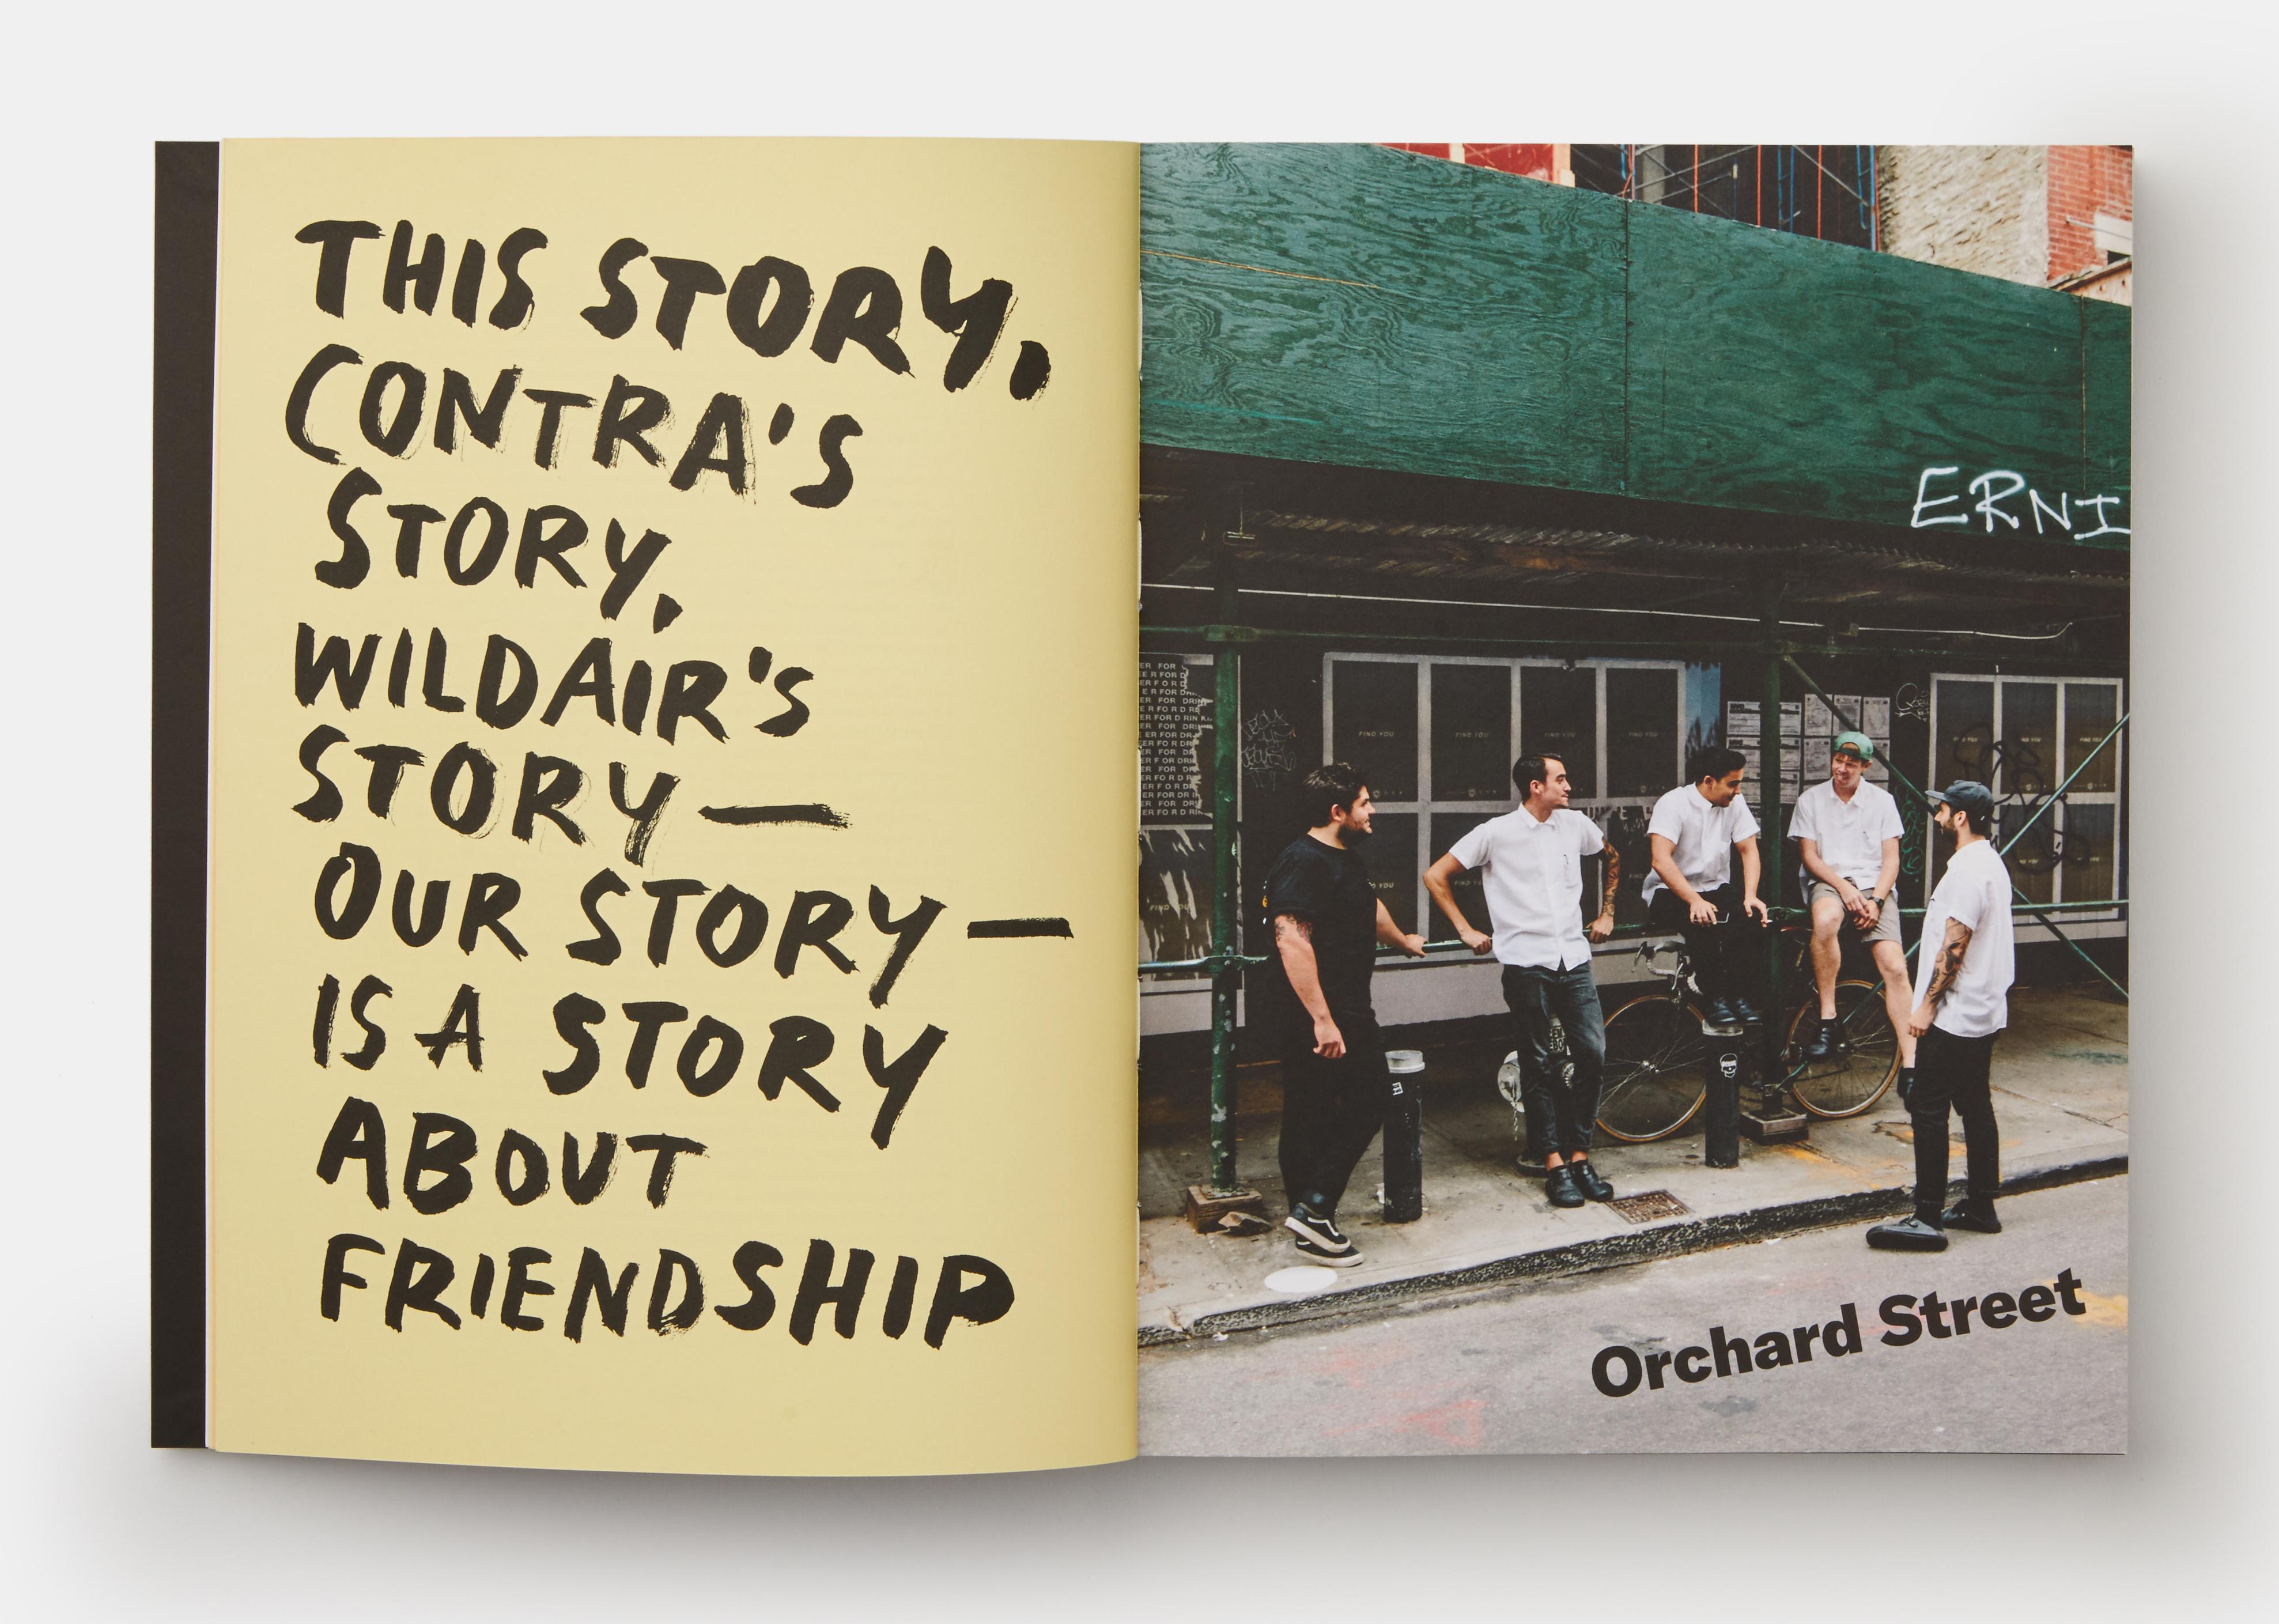 The first cookbook by the wunderkind New York chef duo Jeremiah Stone and Fabián von Hauske of Contra and Wildair. 

This is the story of two places beloved by chefs and foodies worldwide - Lower East Side tasting-menu restaurant Contra, and its